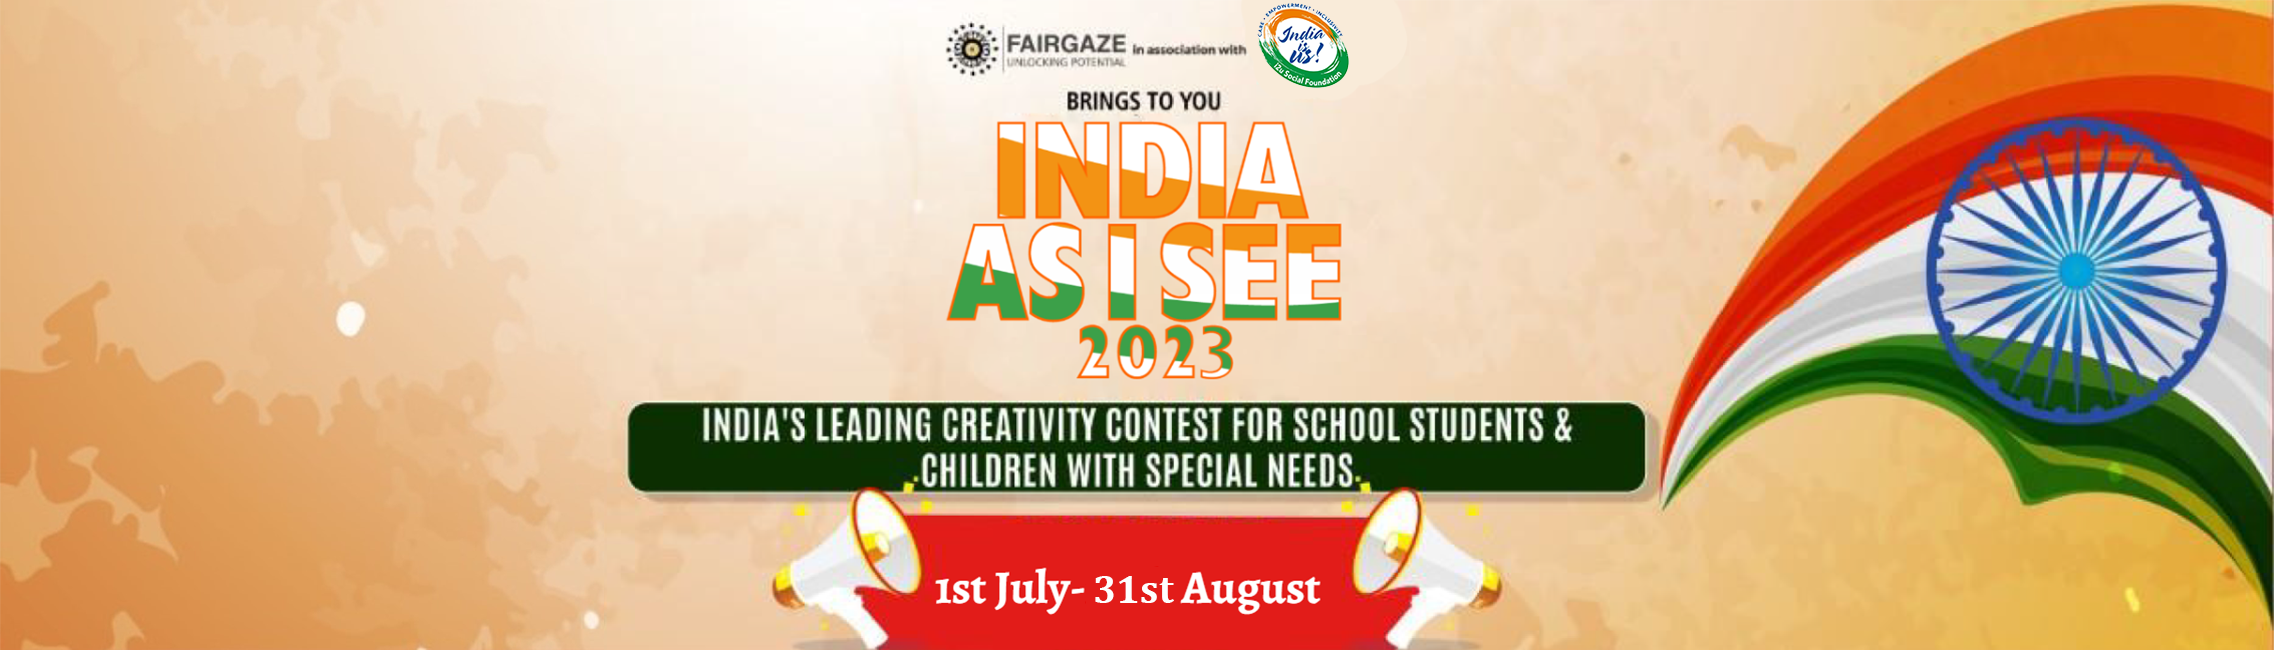 India As I See 2022 Contest for School Students